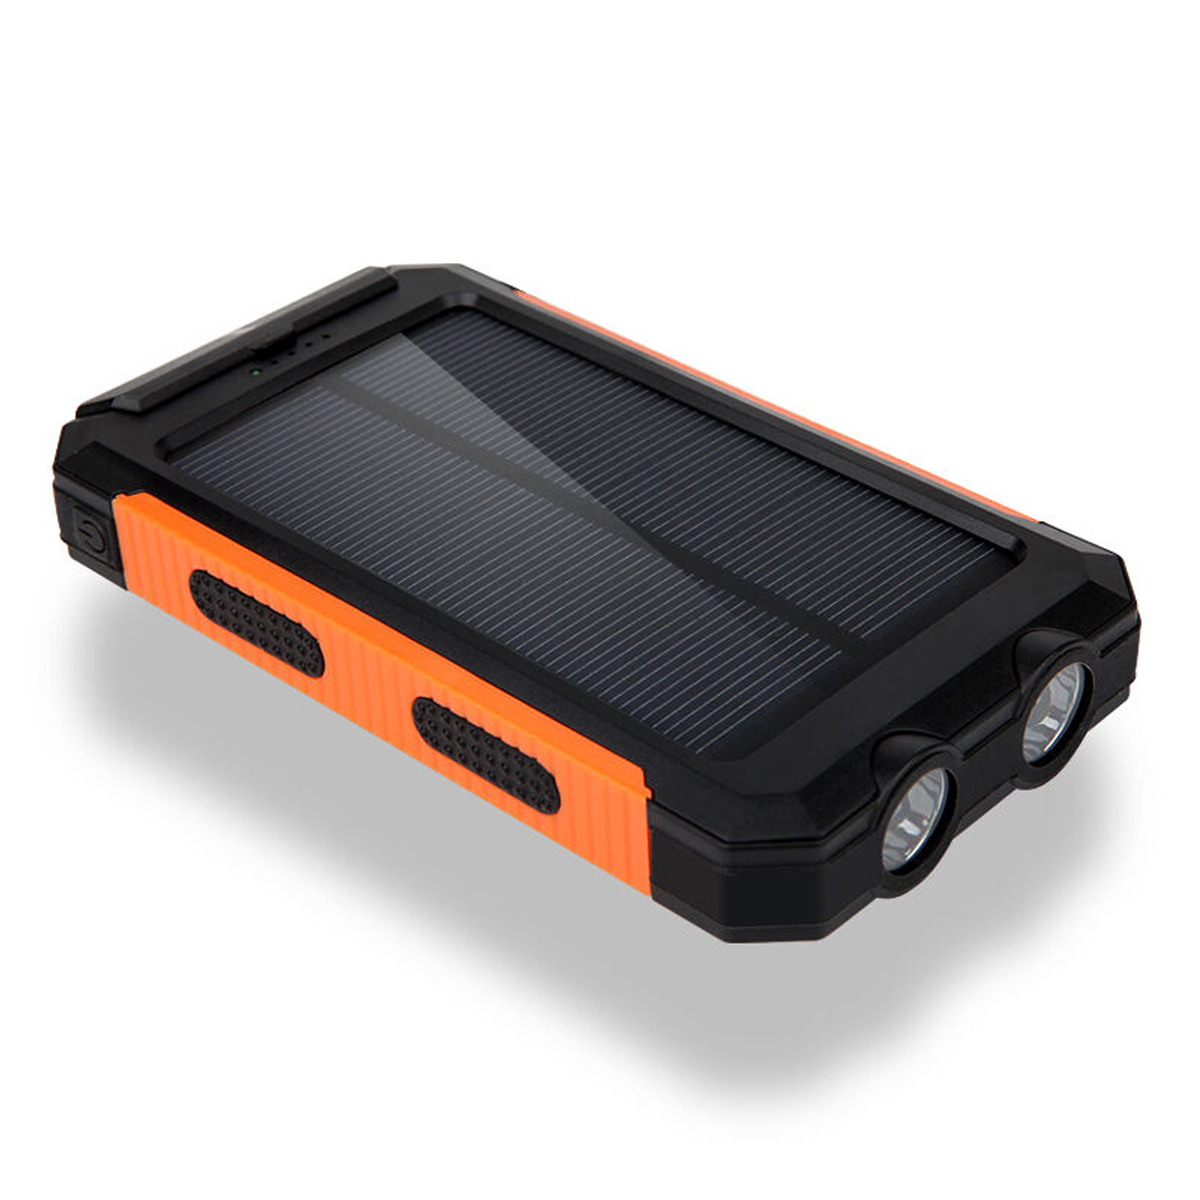 8000MAH-Waterproof-Solar-Power-Bank-Solar-Charger-Built-In-Compass-Dual-USB-Portable-2-LEDs-Light-1716505-9